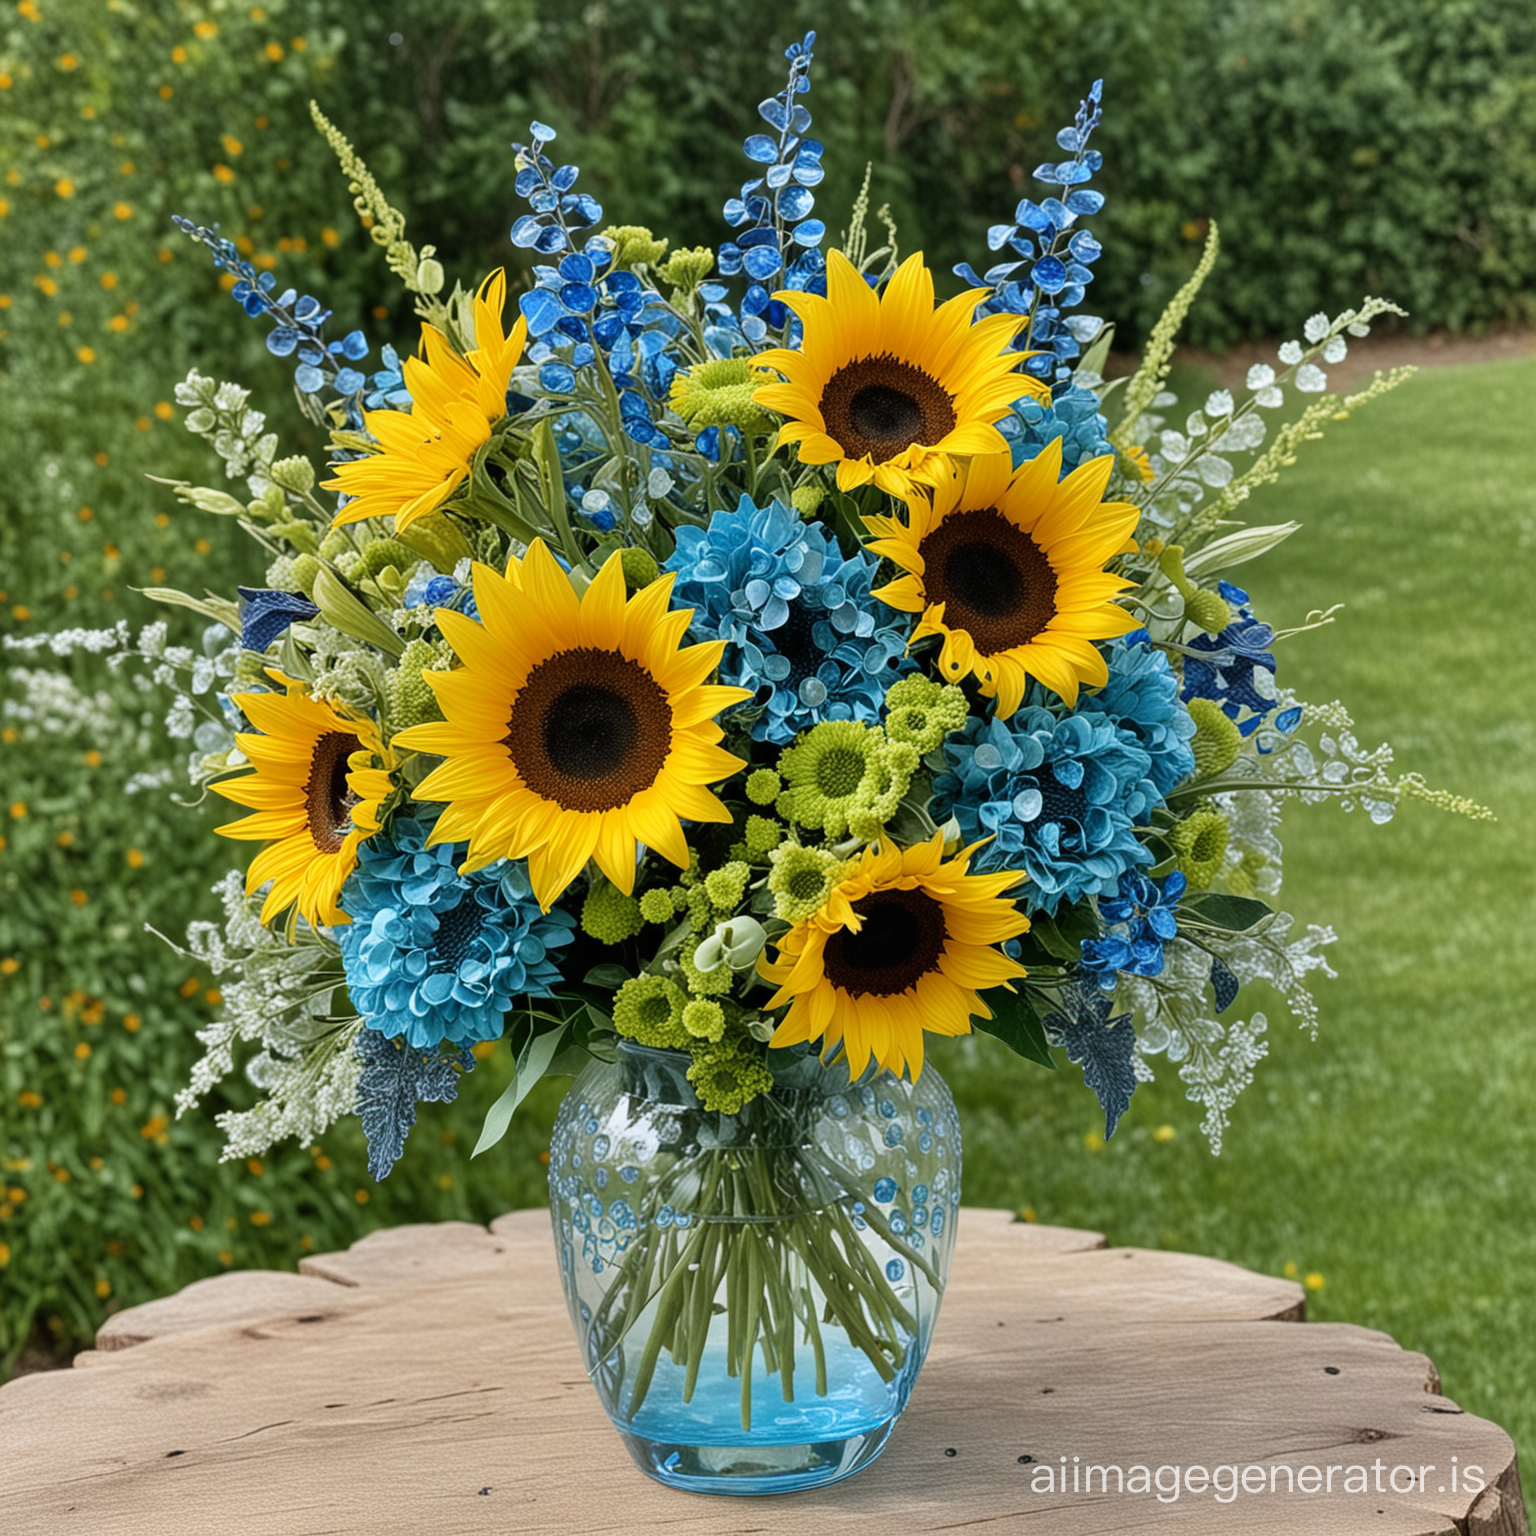 a clear glass vase with glass gems in sea colors like blues and greens, and a bouquet of sunflowers with sea blue accent flowers mixed in